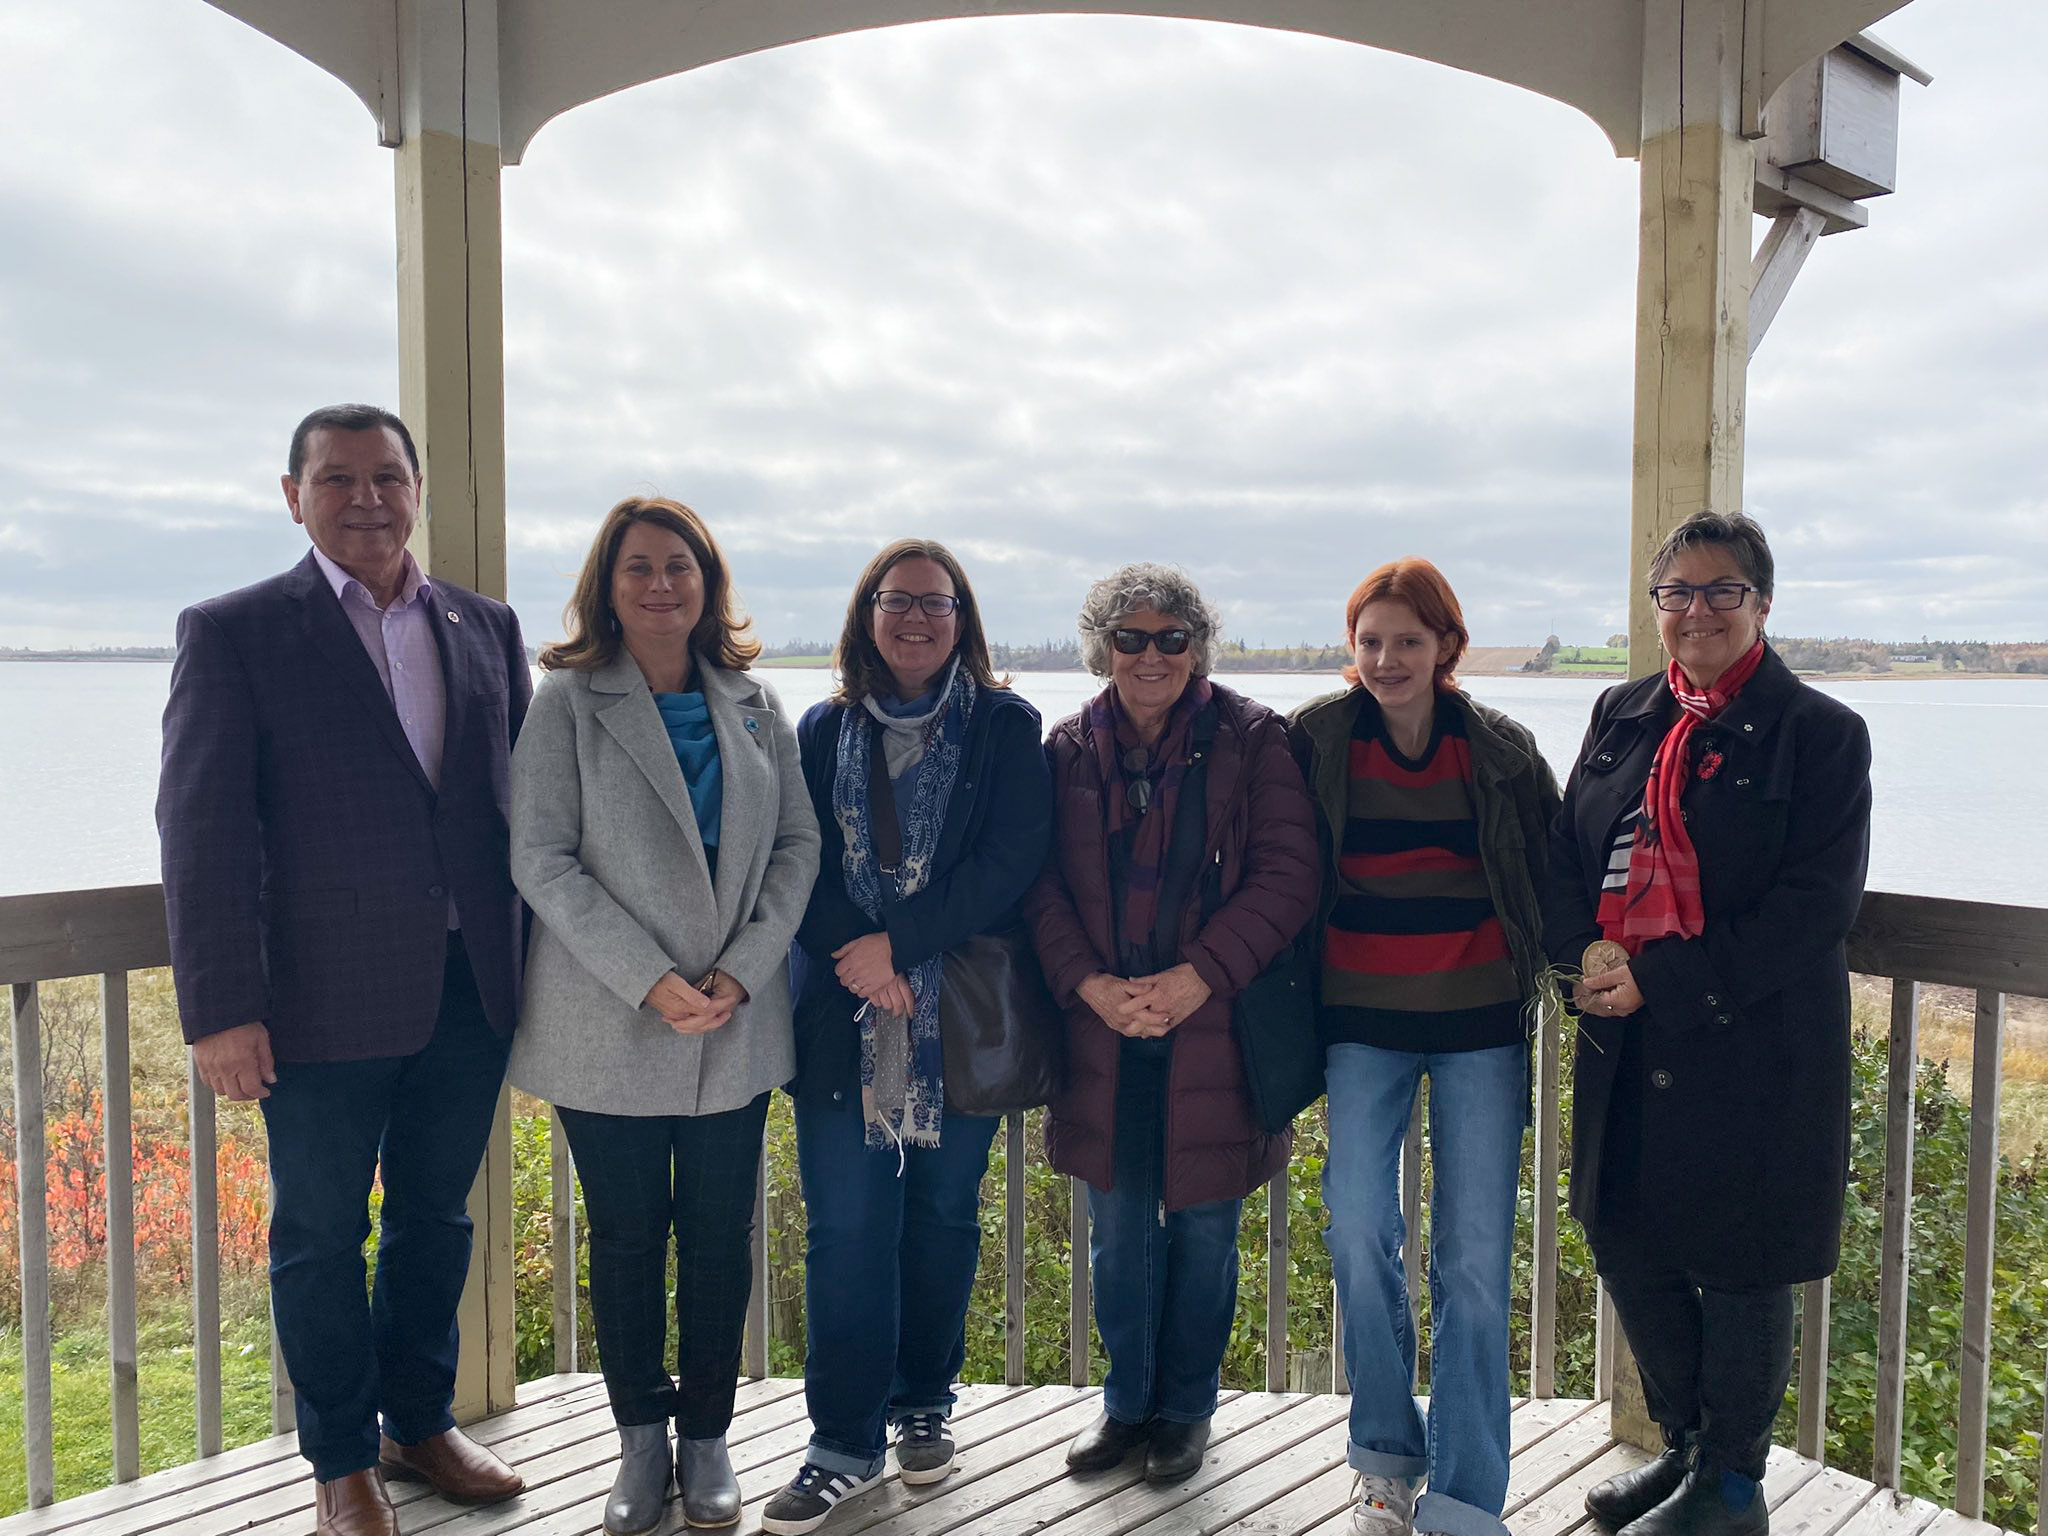 Saturday, October 30, 2021 – Senator Brian Francis travels to Lennox Island First Nation with the Honourable Louise Arbour, Senator Kim Pate and a few others to share some of his culture and take part in a porcupine quill art session.